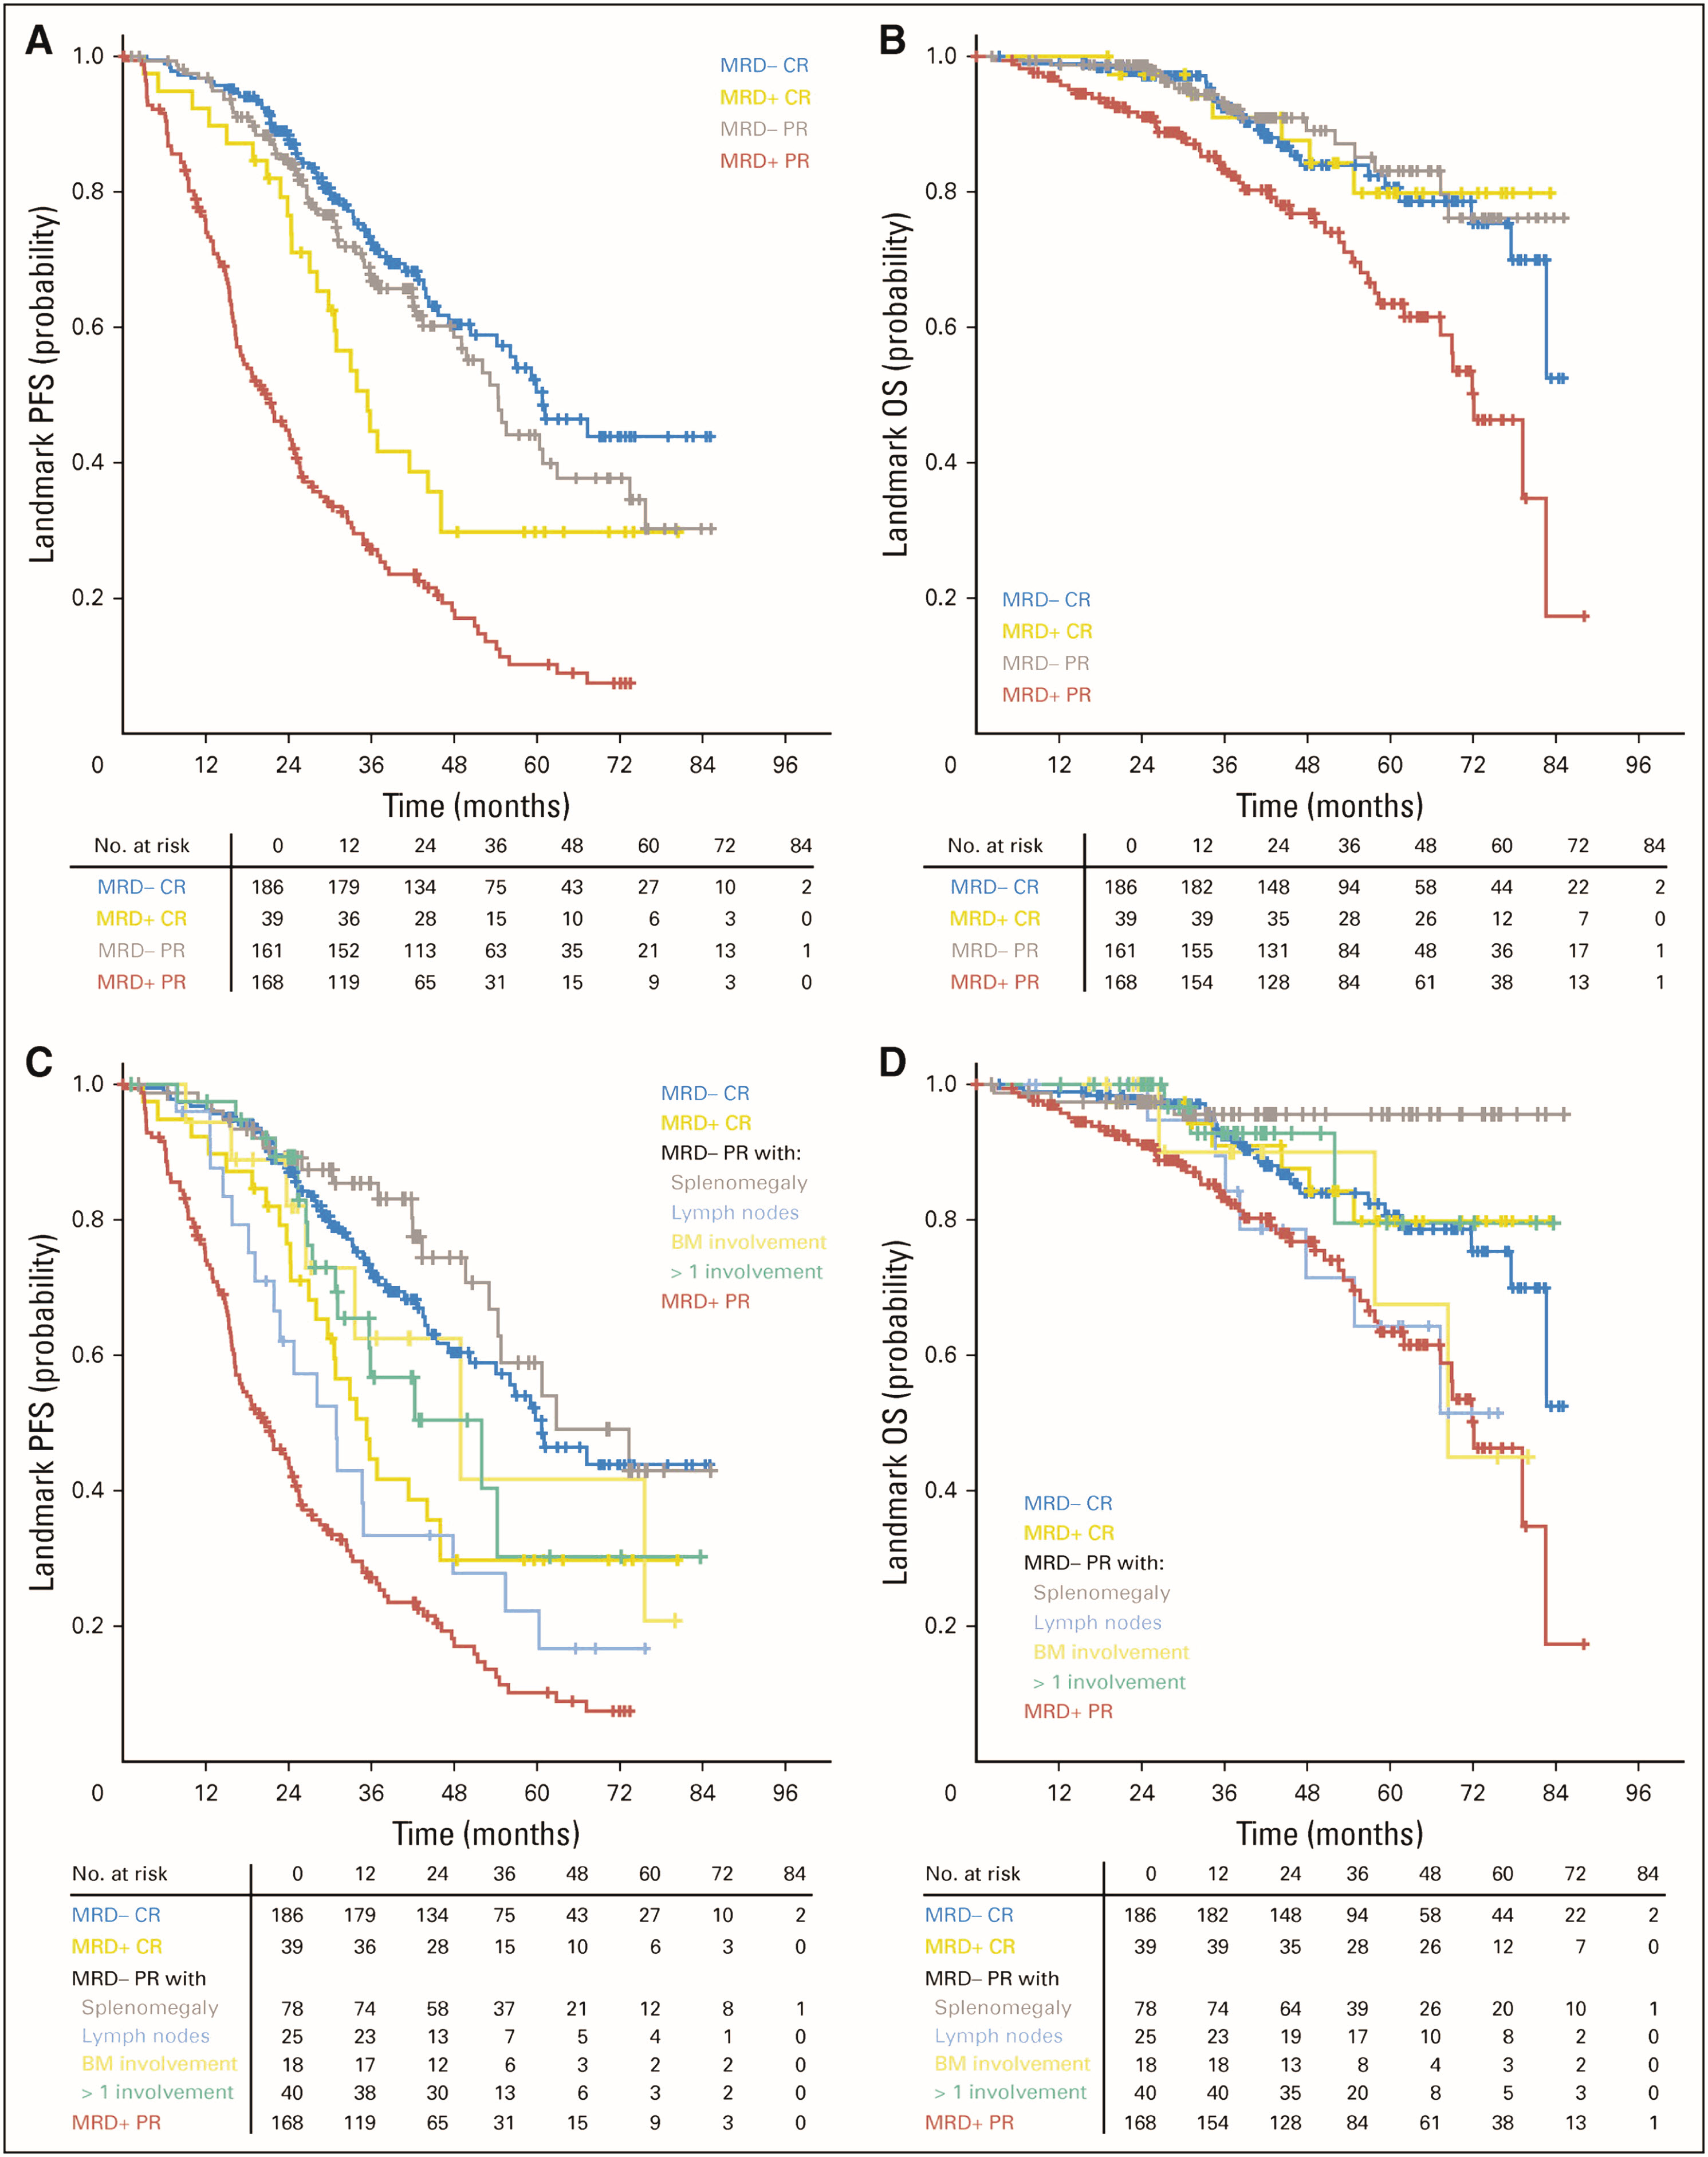 PFS and OS at end of treatment by PB MRD and additional response status